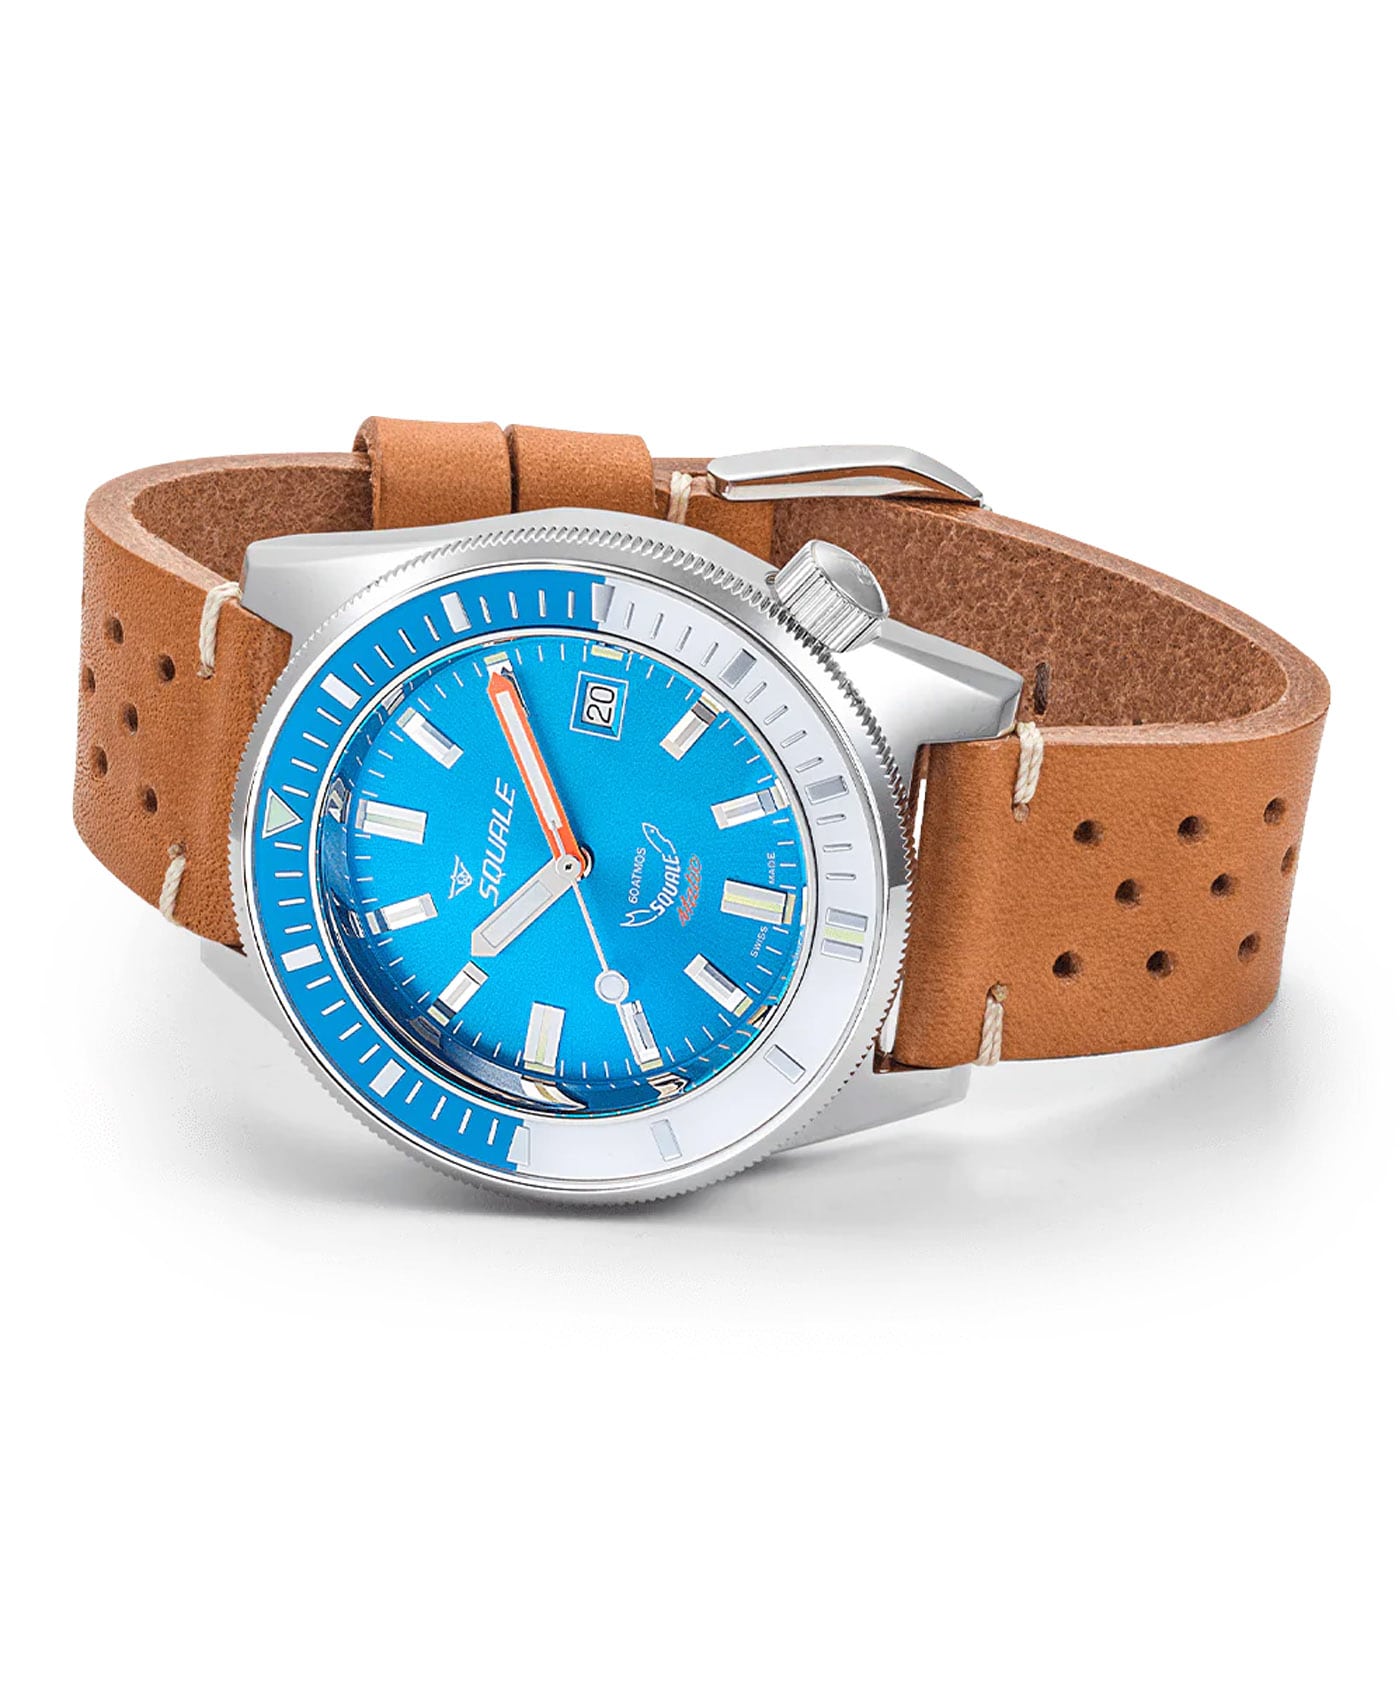 Squale - Matic - Light Blue - 60 ATM - Leather Strap-full-min